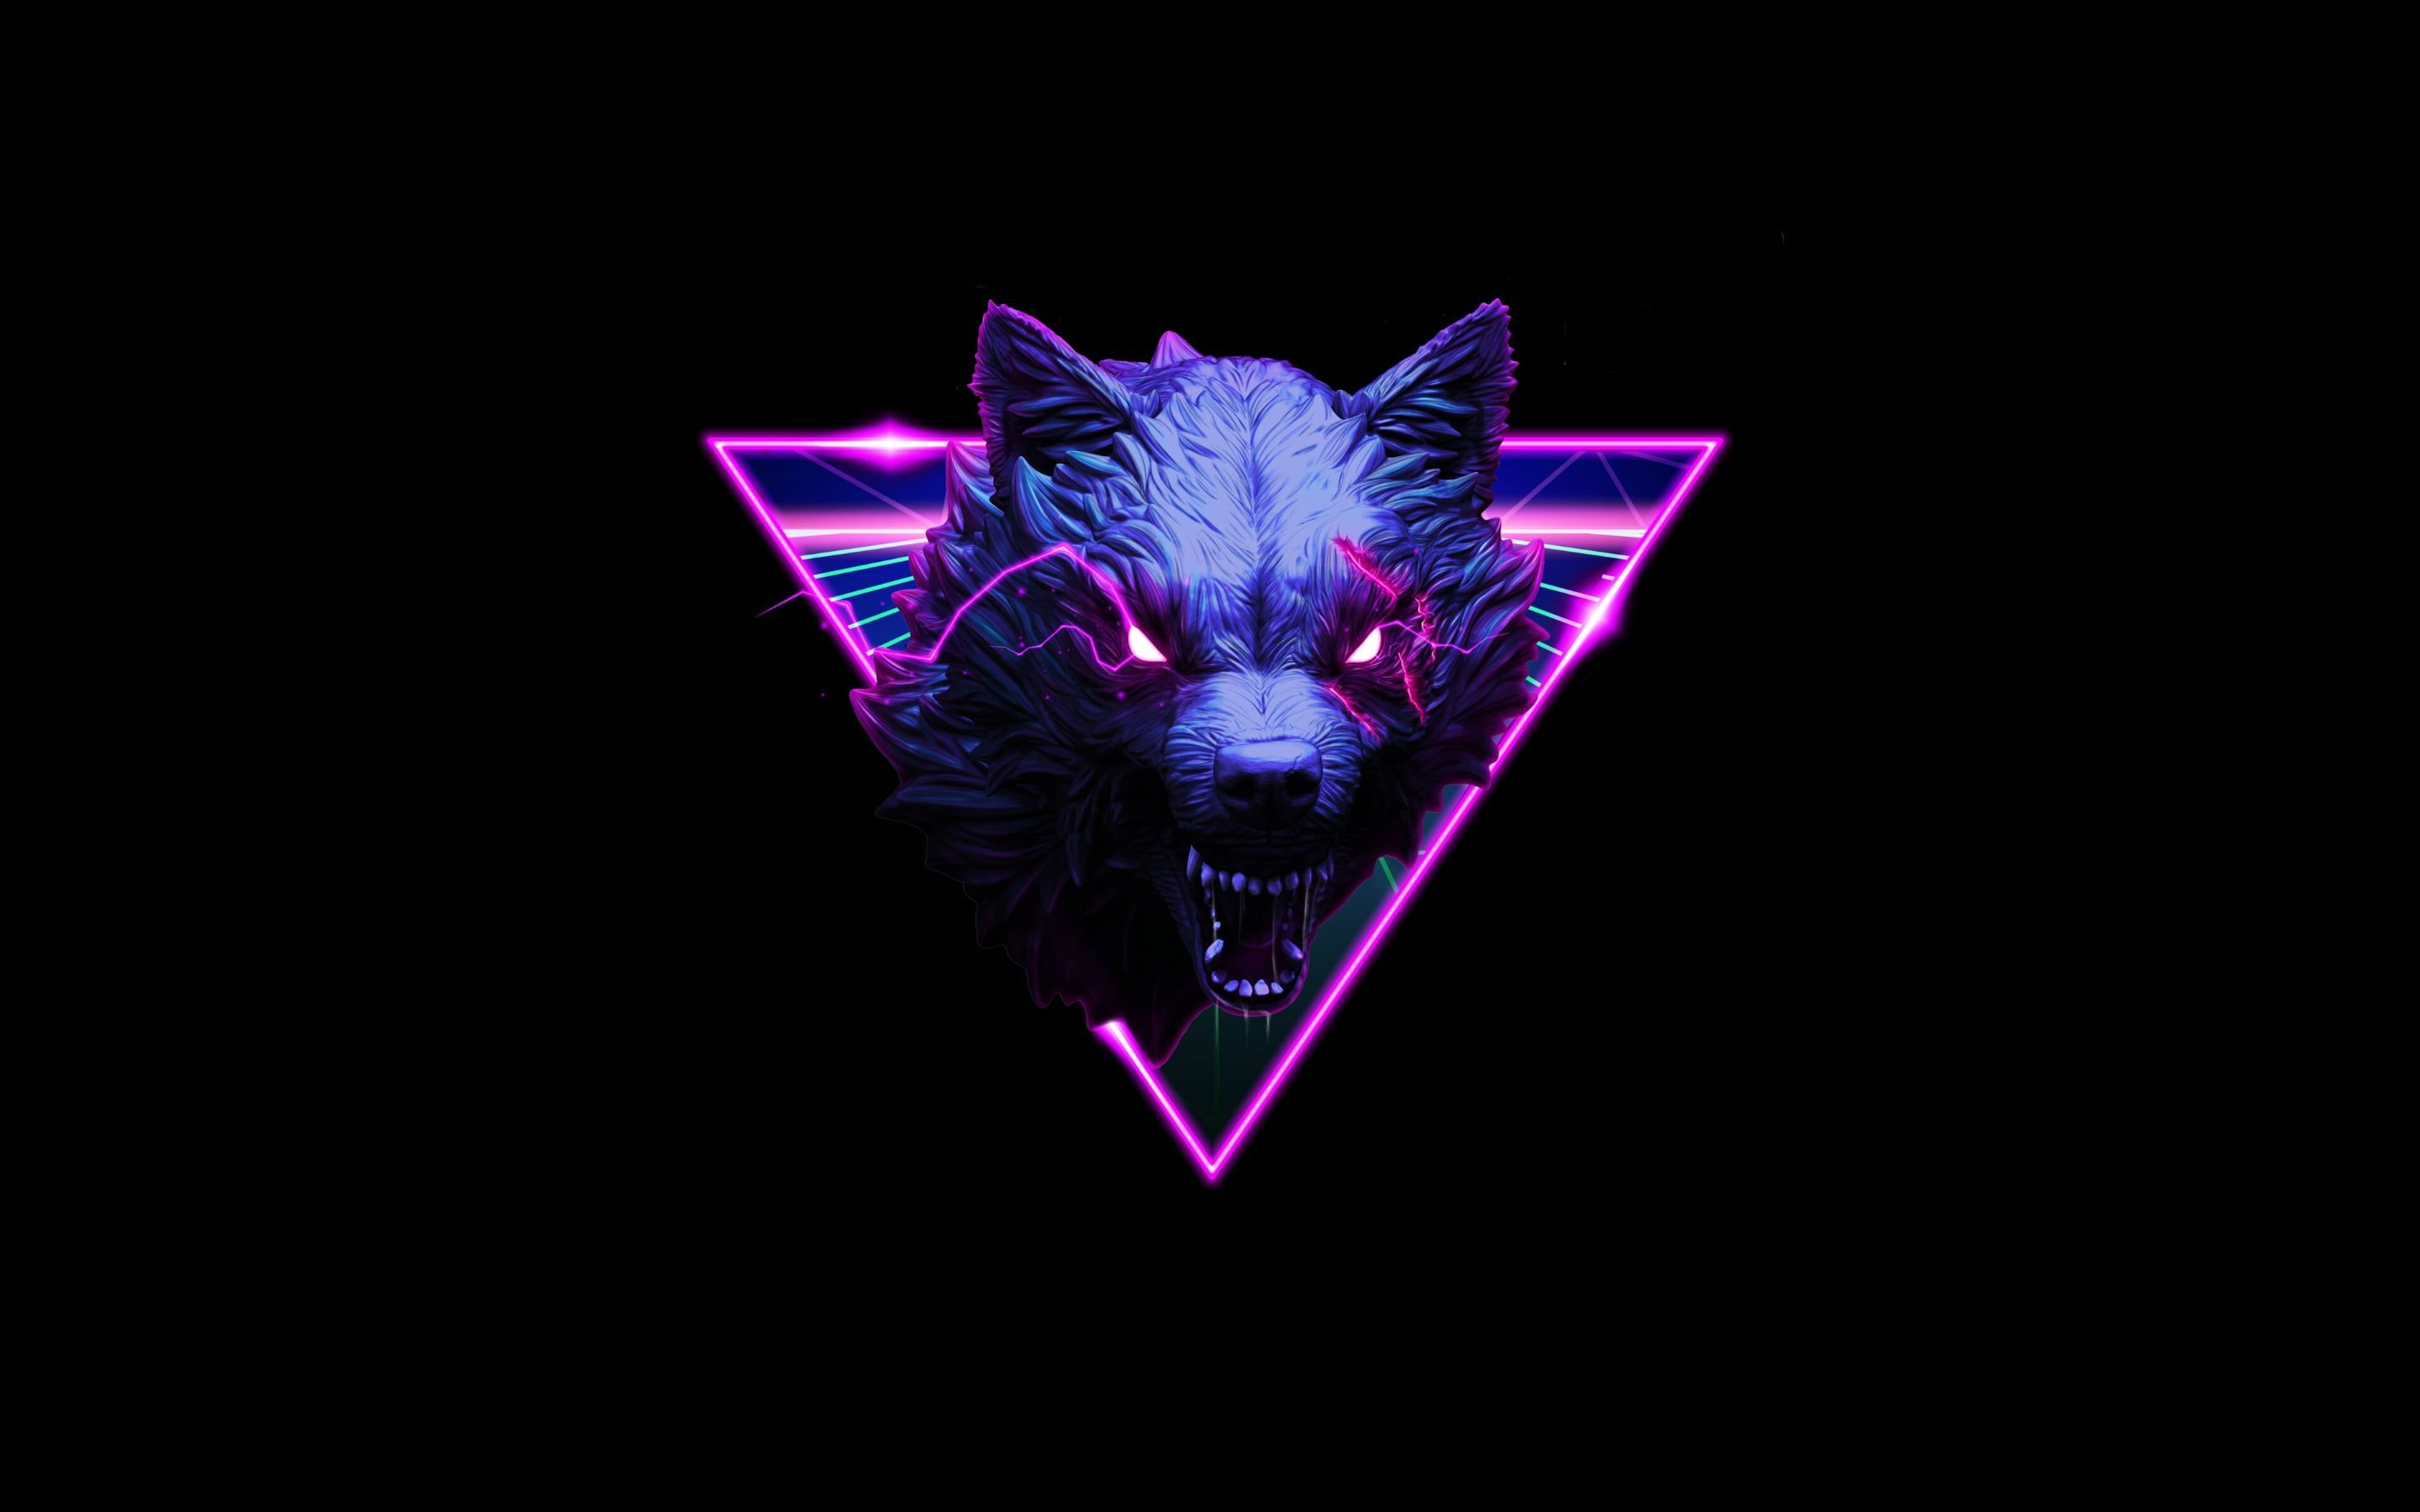 A wolf with purple eyes in the shape of an equilateral triangle - Wolf